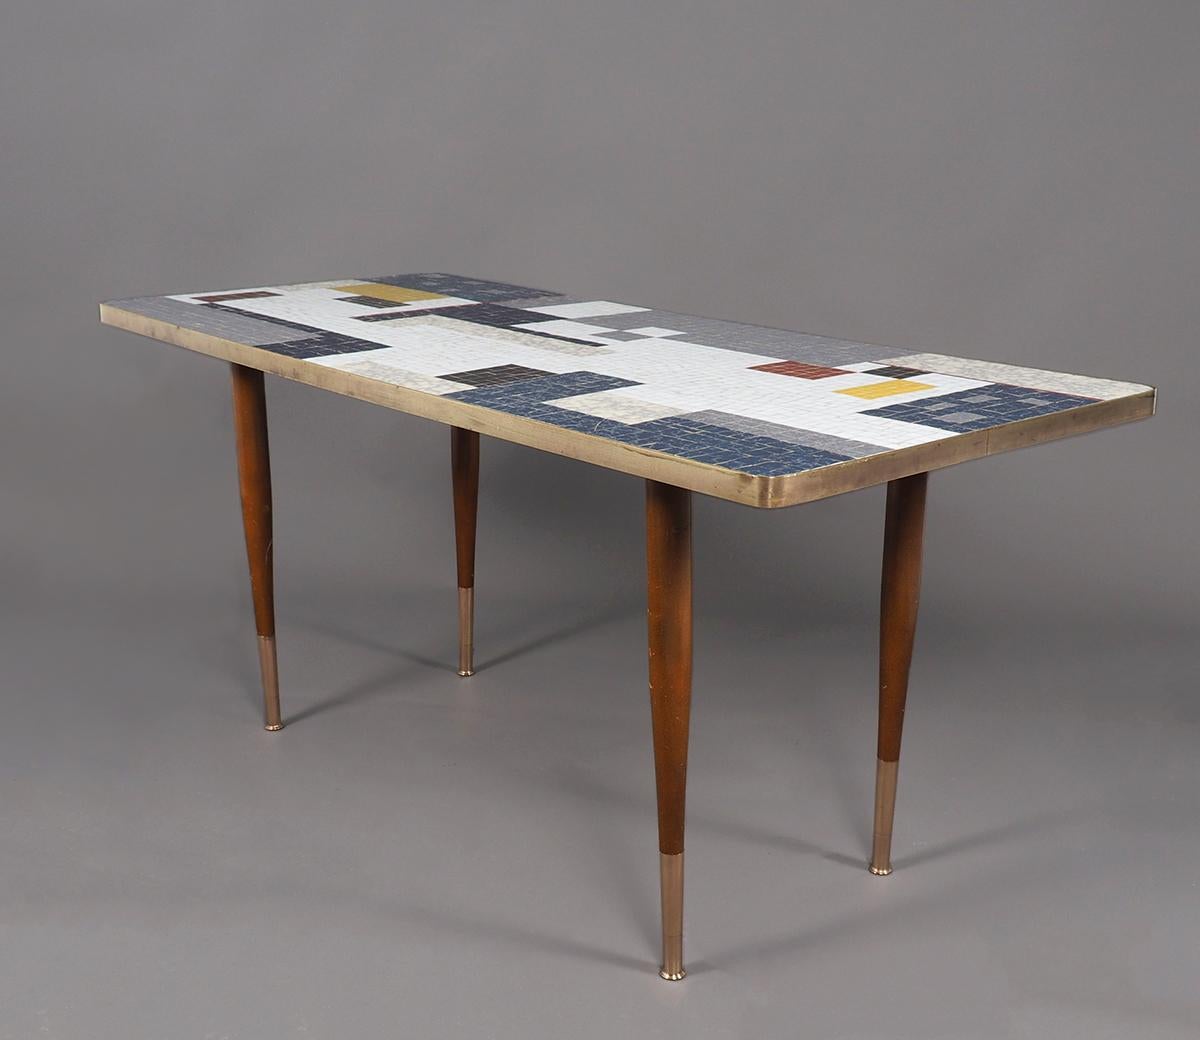 Vintage mosaic coffee table or side table produced by Ilse Möbel in the 1950s.

Model Paris.

Beautiful abstract (reminiscent of Mondrian) inlaid tabletop with different colors of grey, white, blue, yellow and red.

The top is framed with a